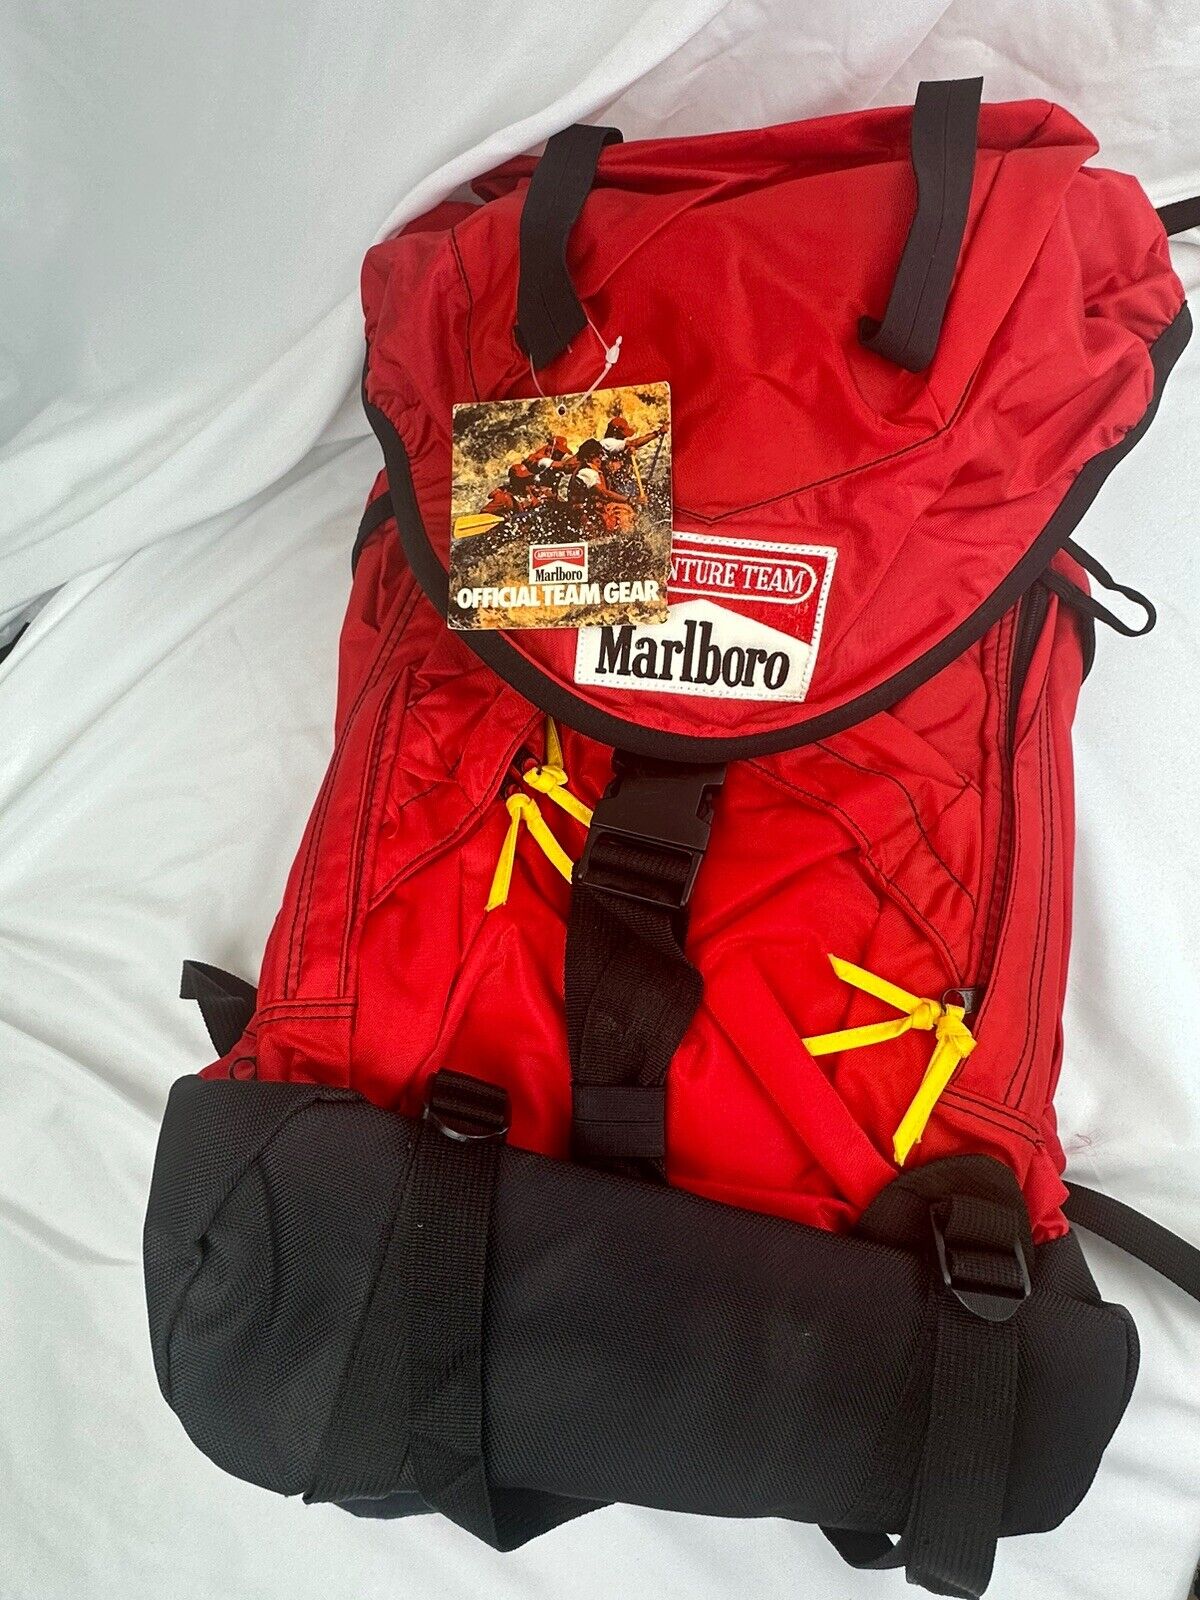 Vintage 90’s Marlboro Adventure Team Red Large Camping Hiking Backpack WITH TAGS